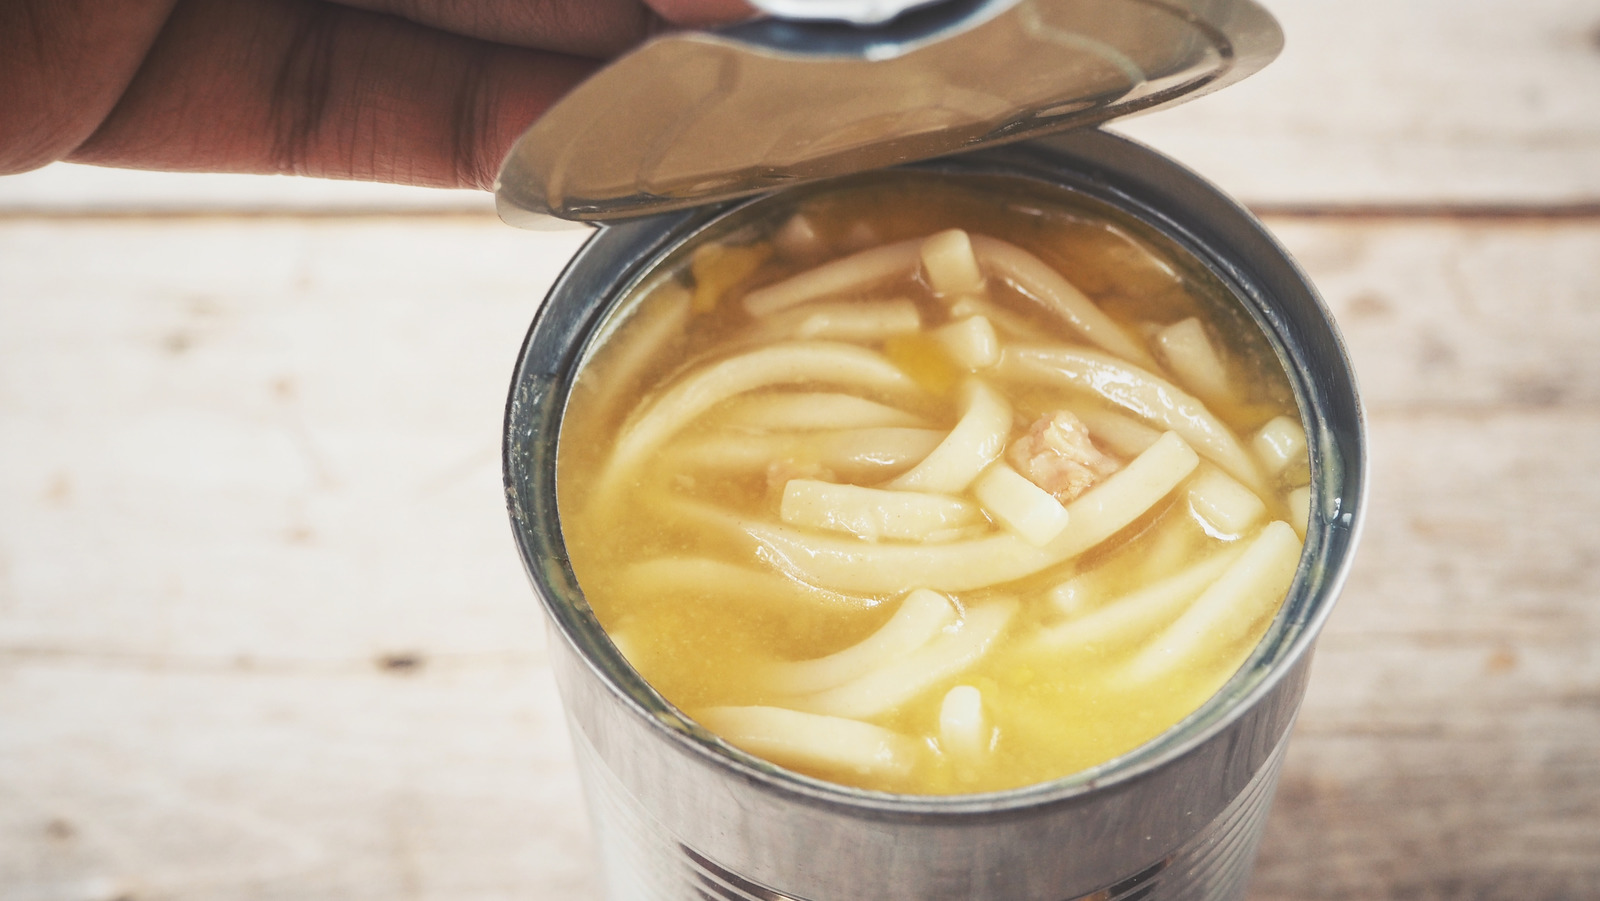 Why You Should Steer Clear Of Canned Soup When You're Sick